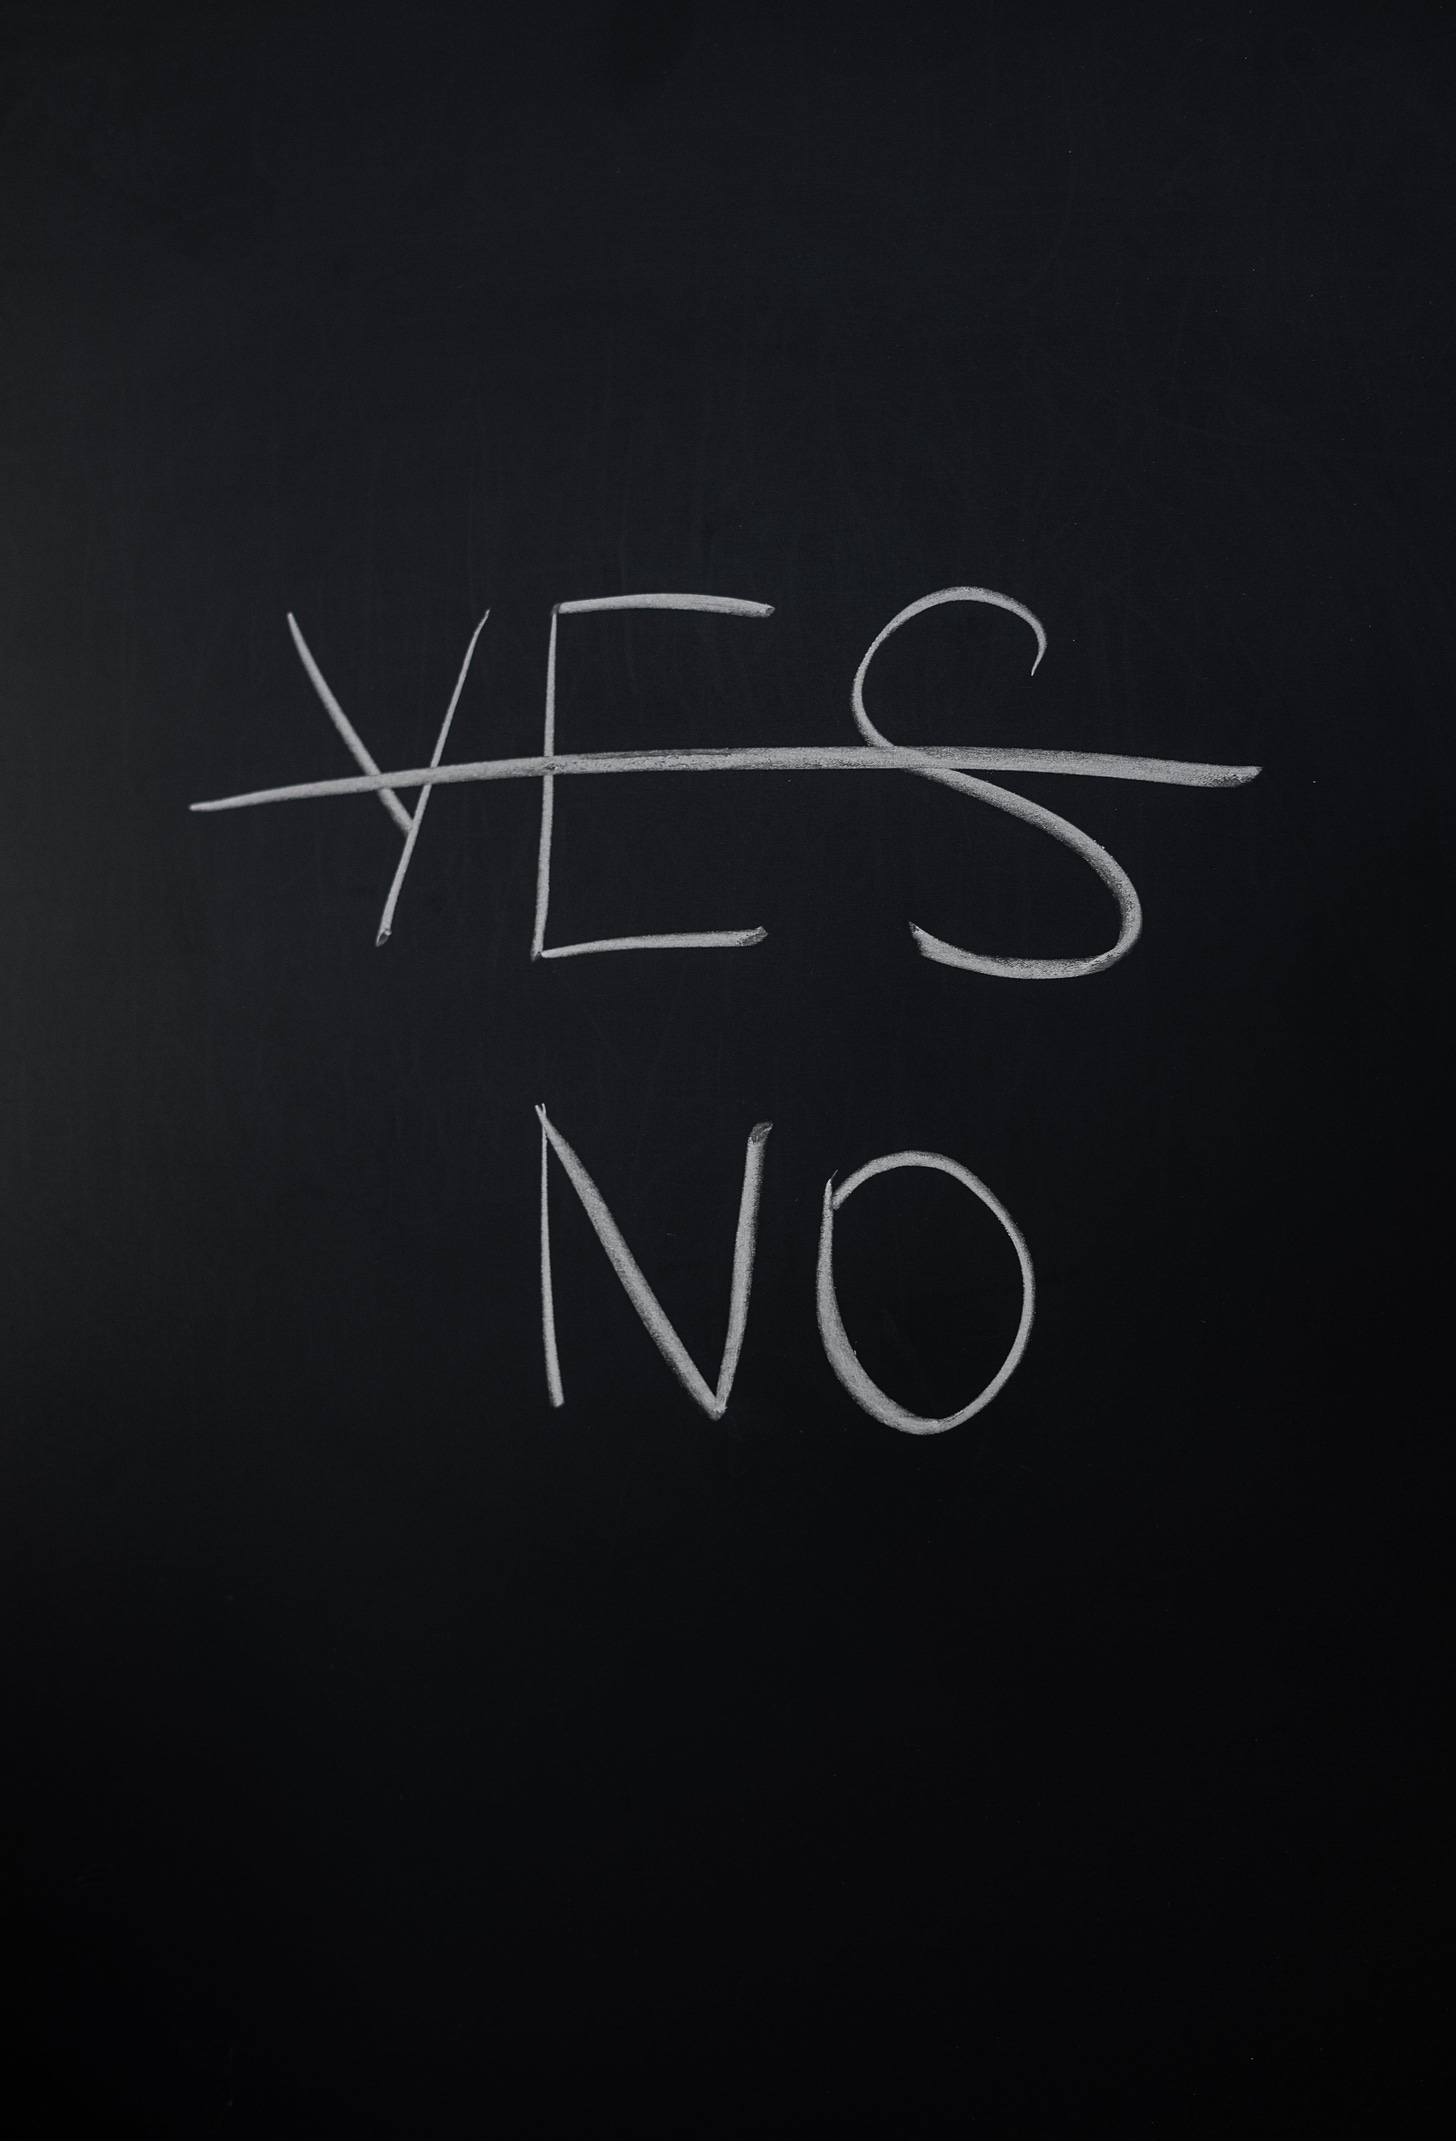 The word “yes” is crossed out on a chalk board in white chalk, leaving only the word “no” below it (also in white).